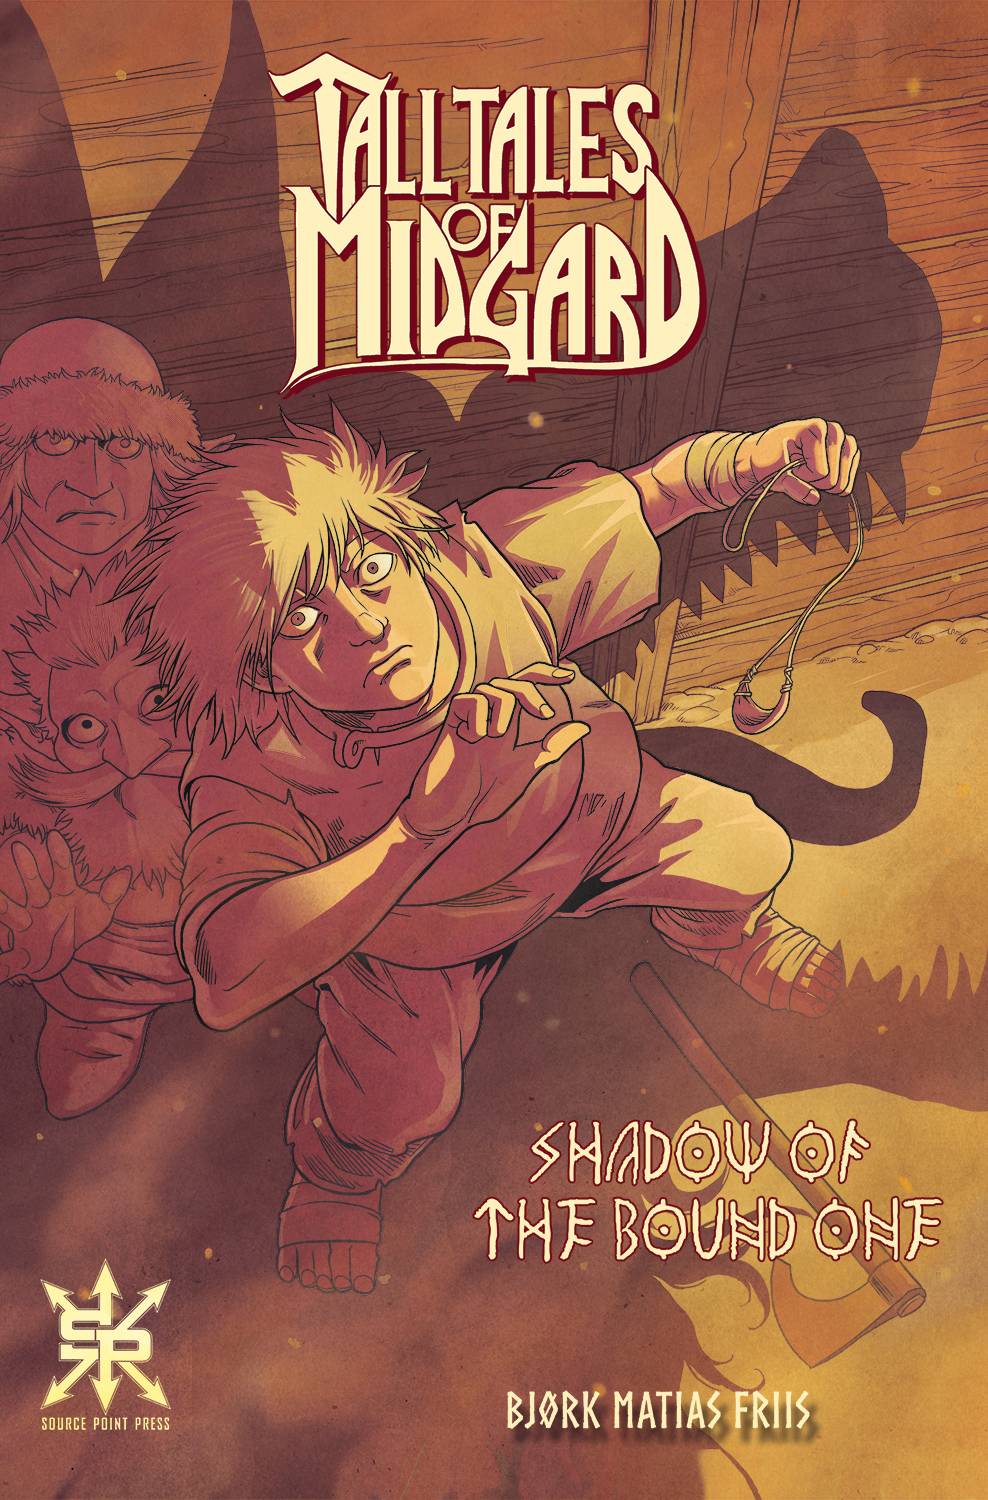 TALL TALES OF MIDGARD HC VOL 01 SHADOW OF THE BOUND ONE